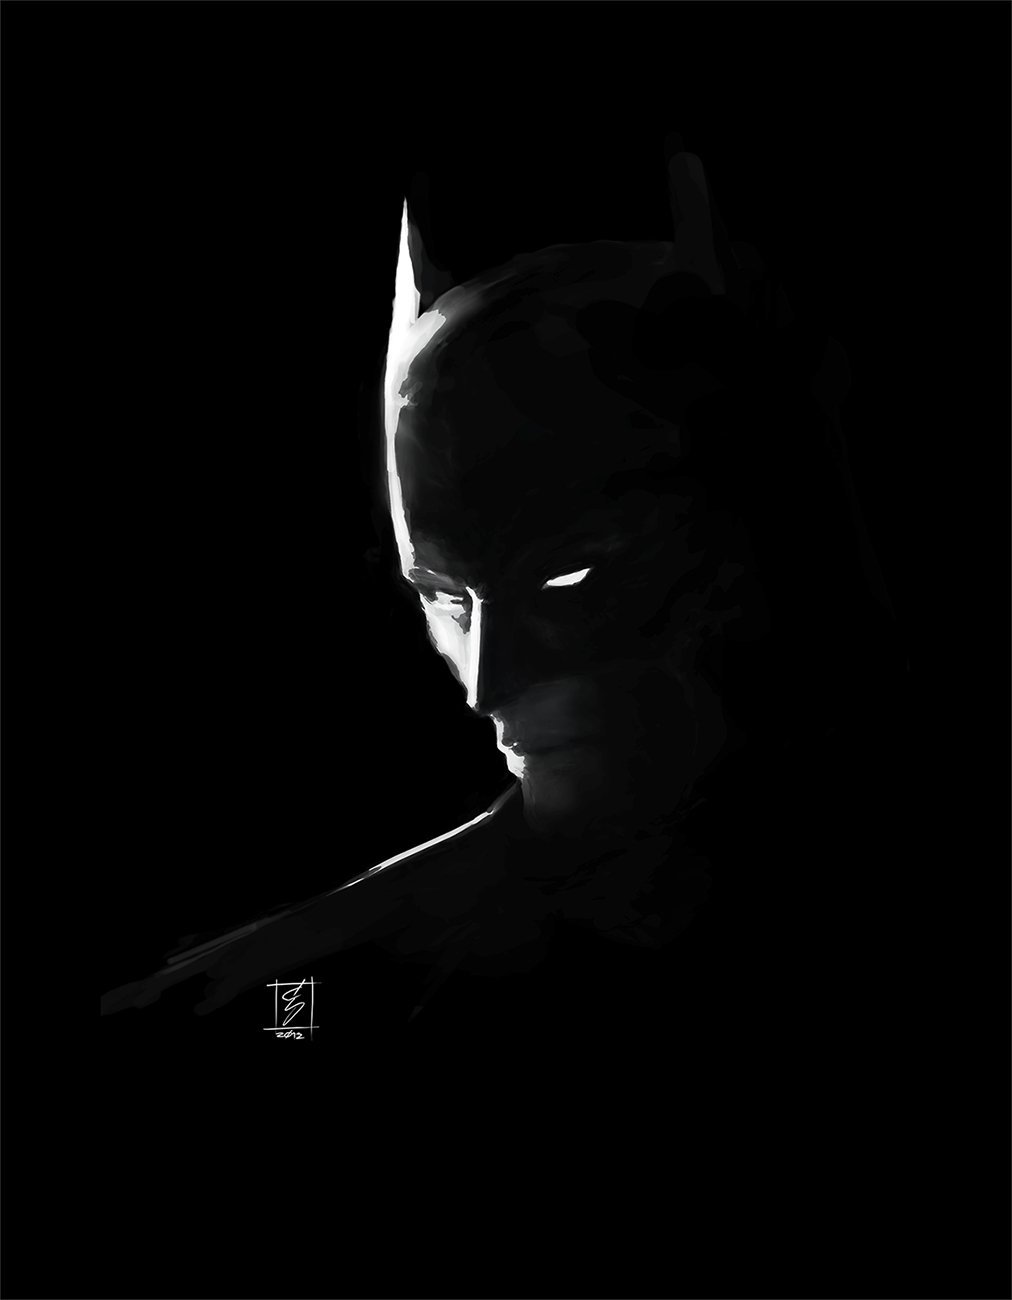 48+] Black and White Batman Wallpapers